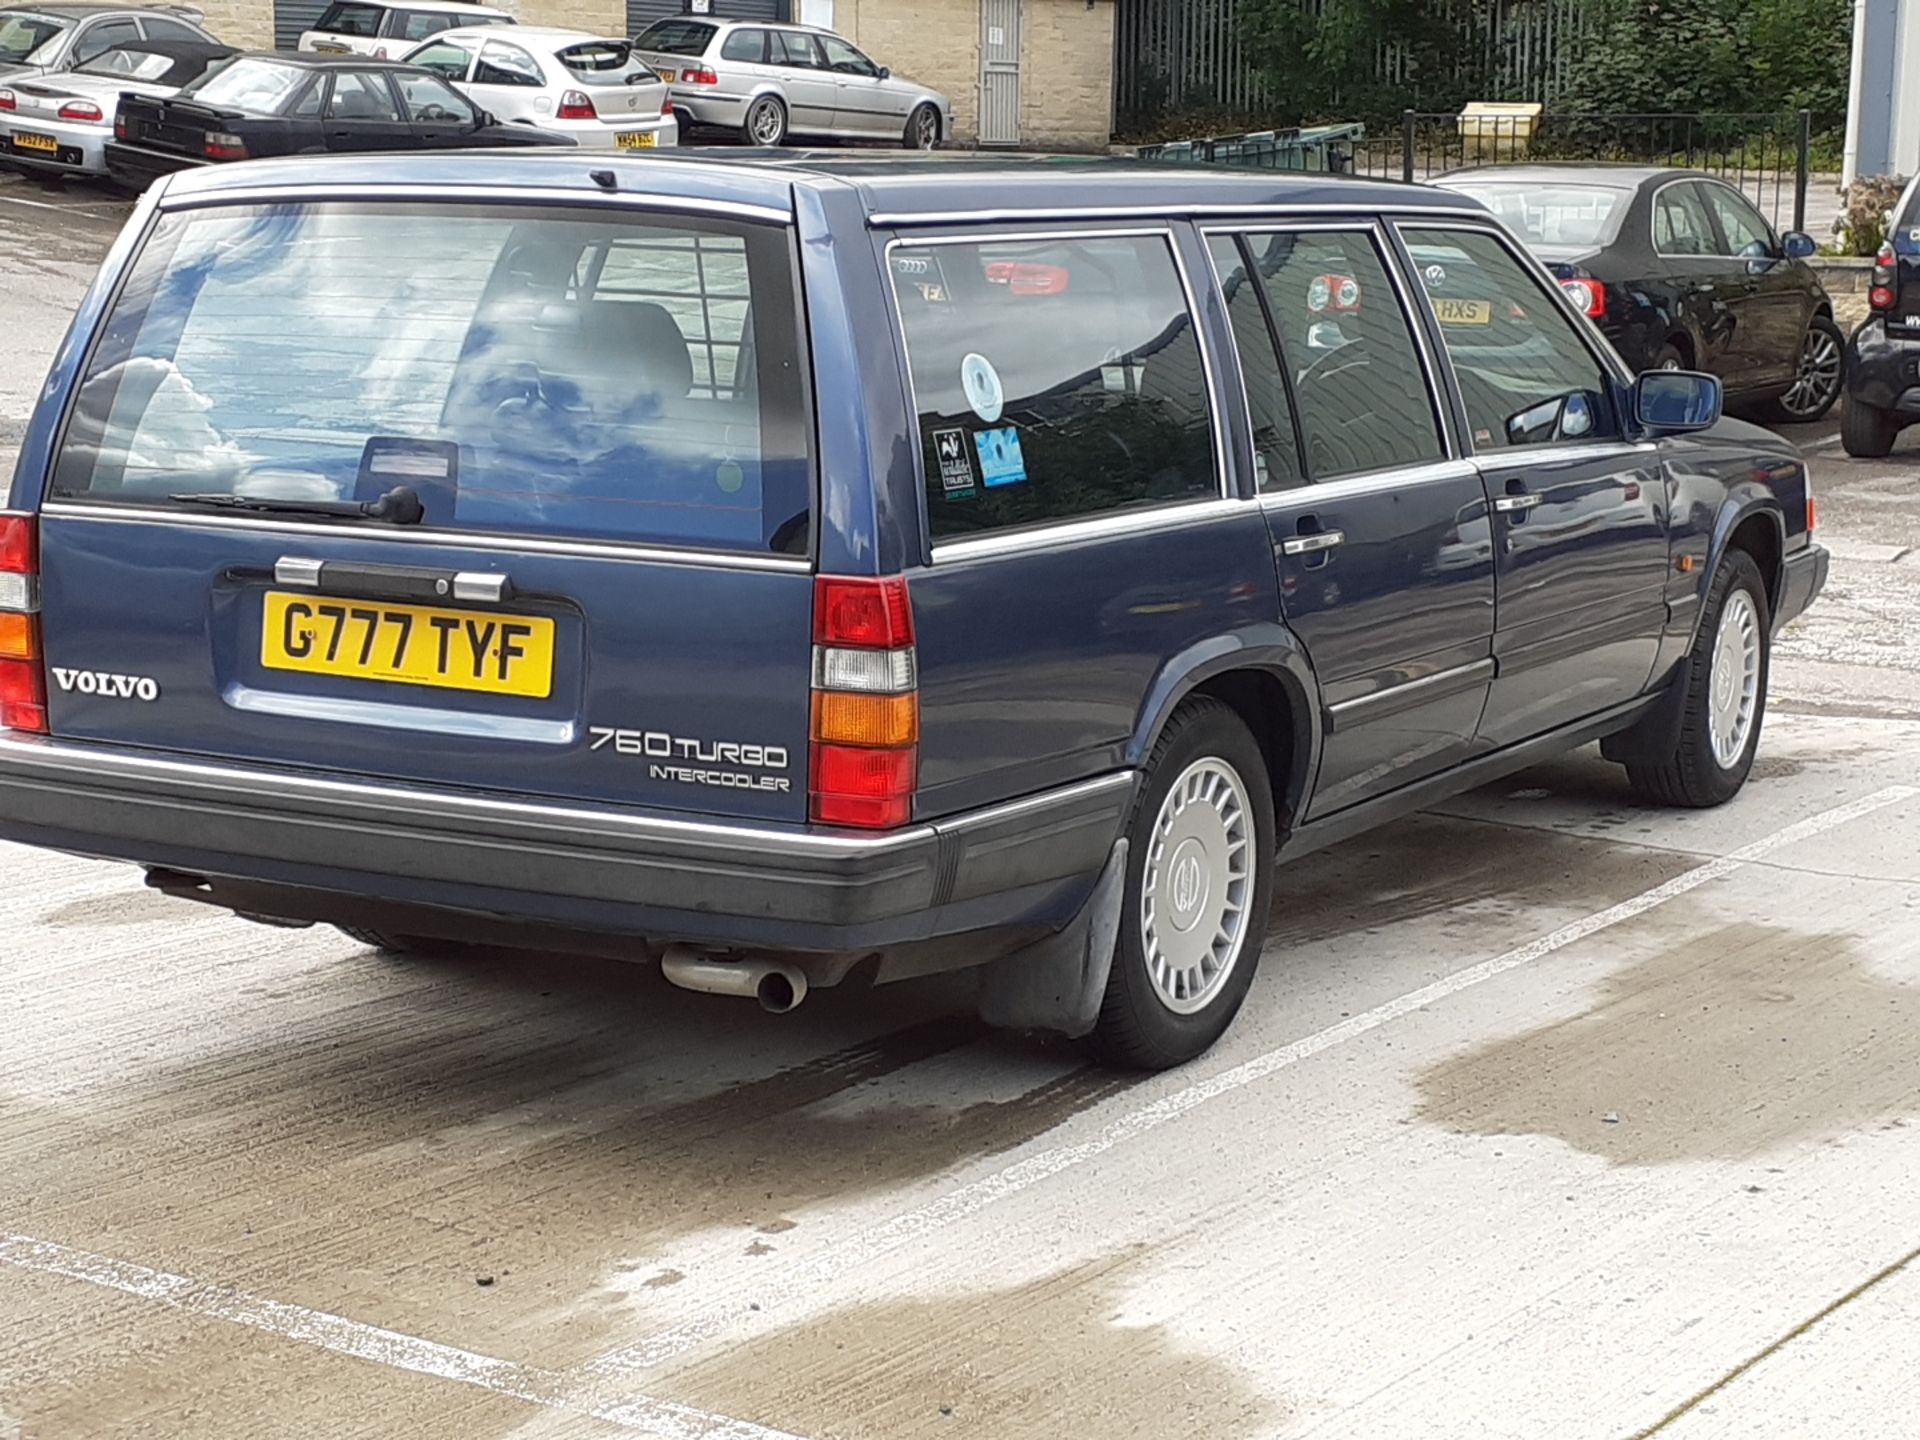 1989/G REG VOLVO 760 TURBO 2.3 PETROL AUTO ESTATE, SHOWING 3 FORMER KEEPERS *NO VAT* - Image 9 of 16